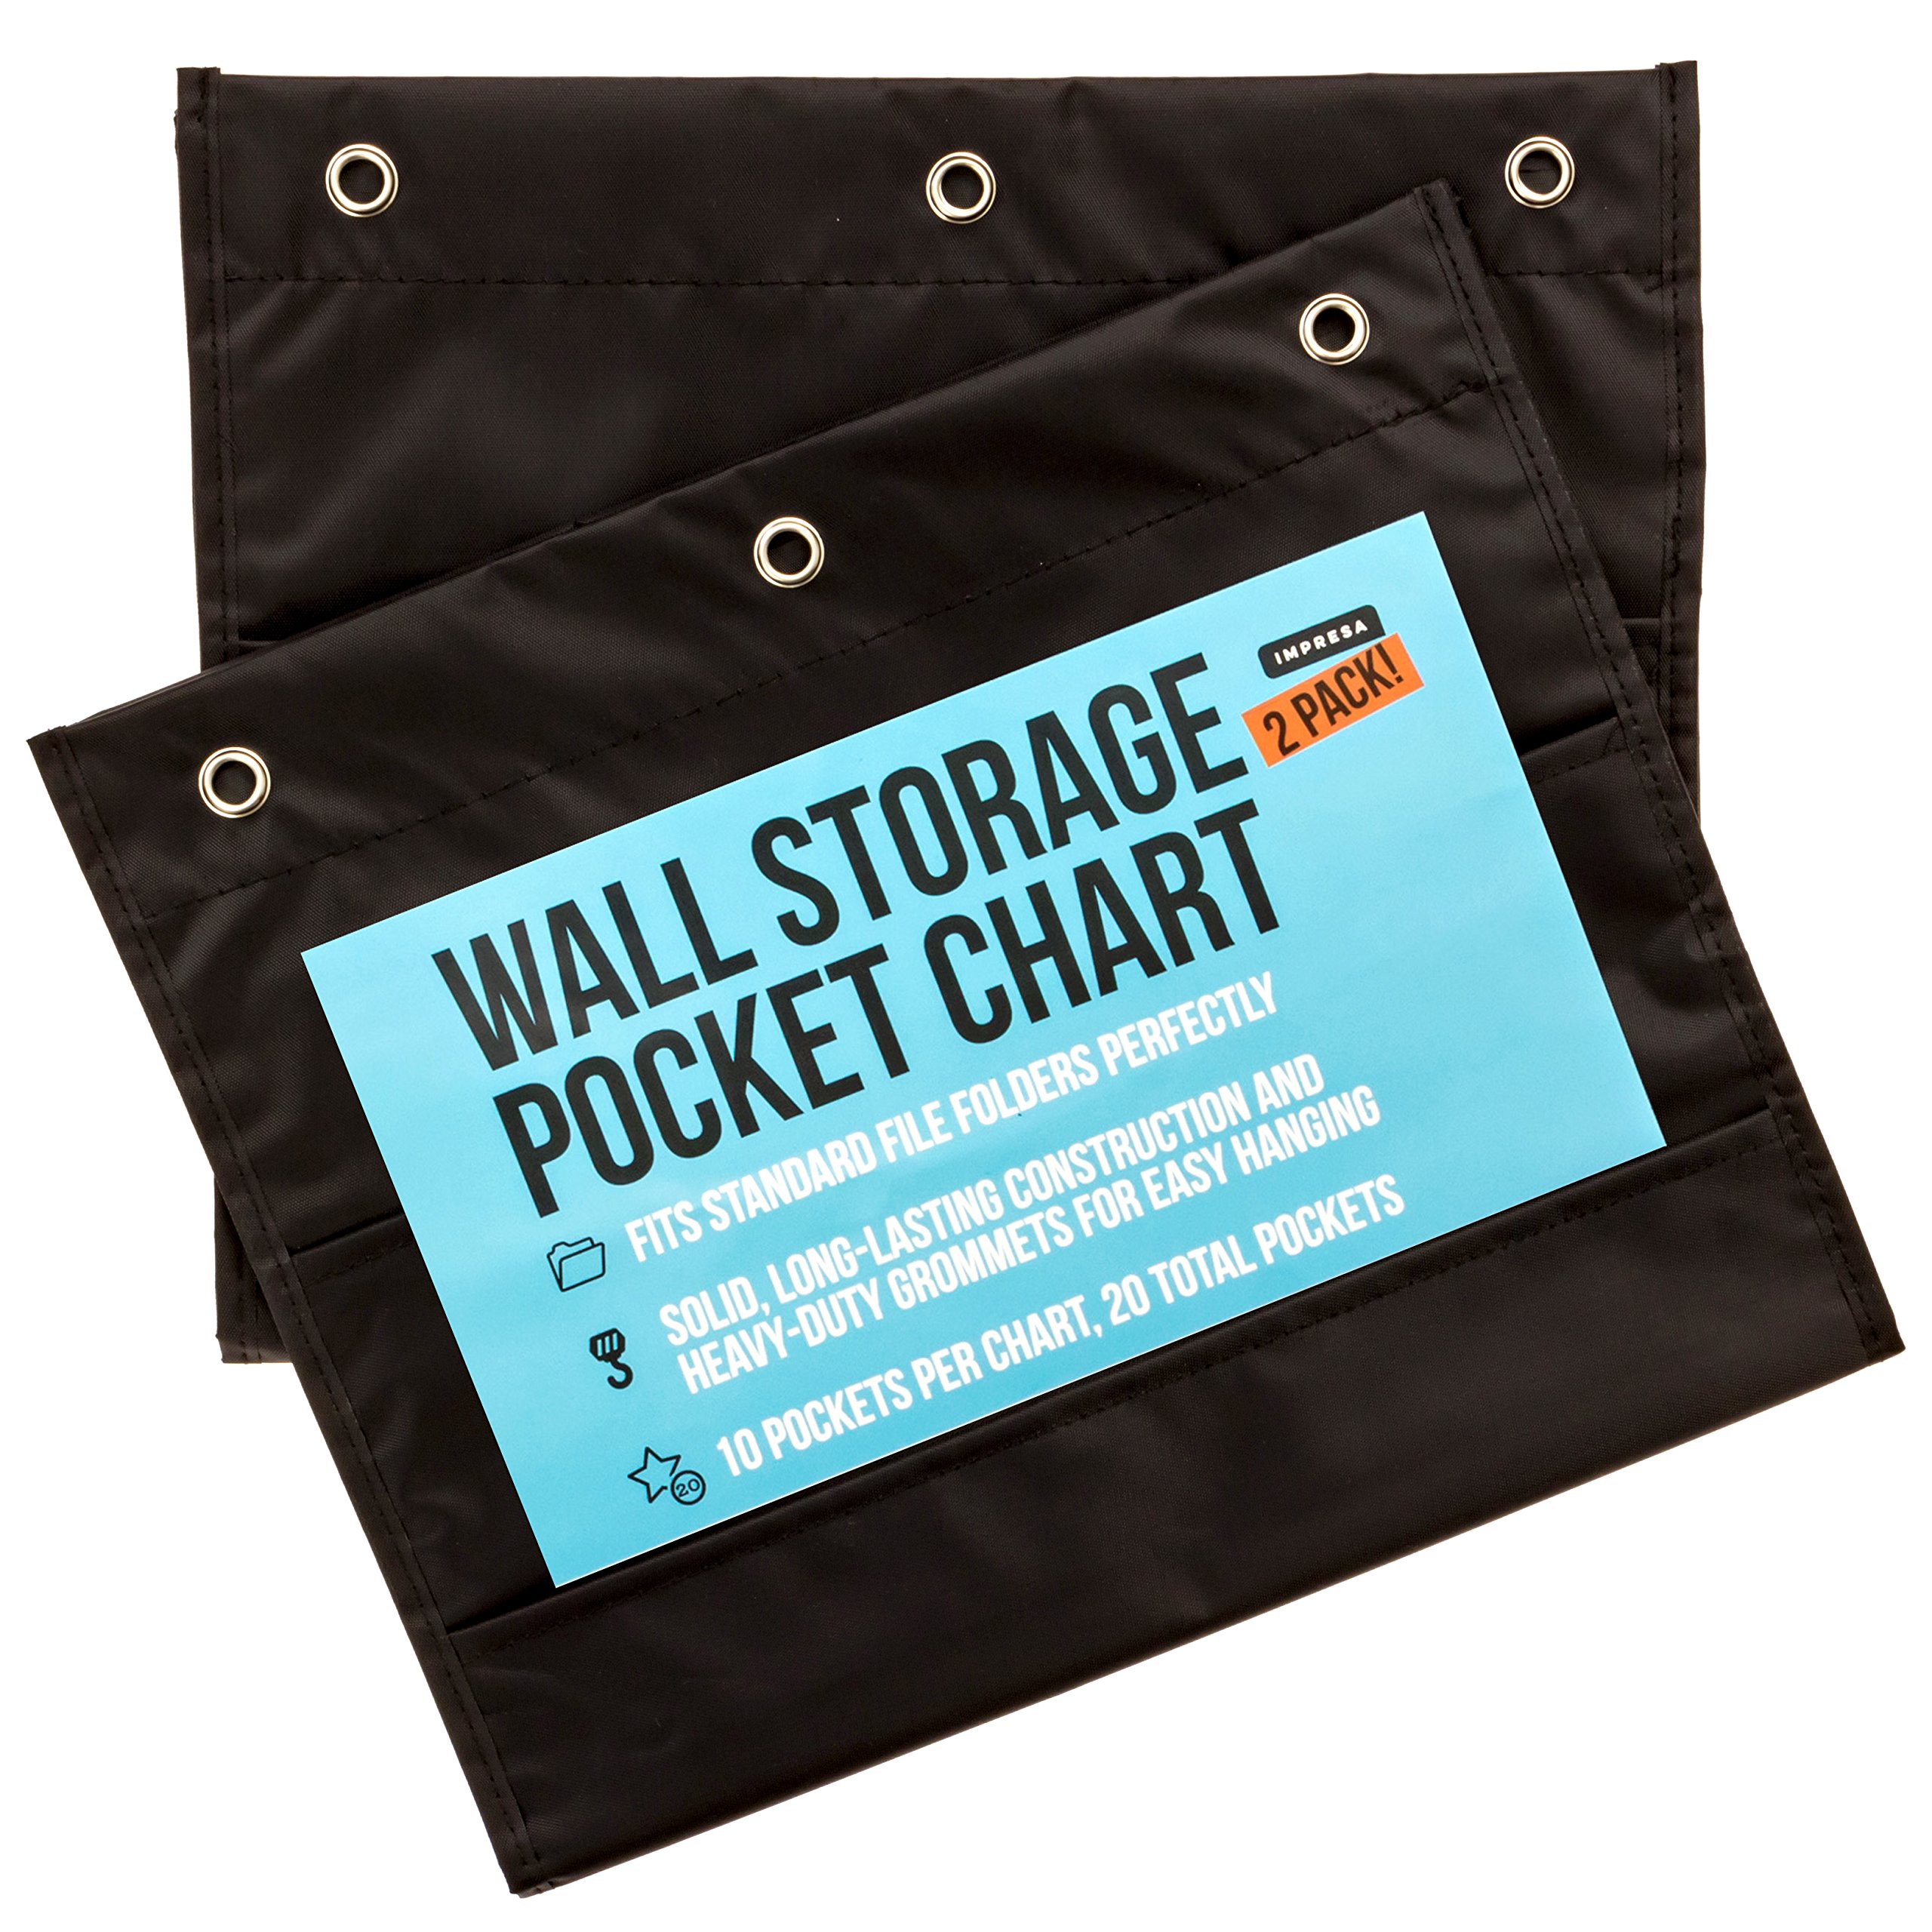 2-Pack Premium Wall Storage Pocket Charts/Hanging Folder Organizers - Black, 10 Pockets Per Piece (20 Total Pockets) - The Ideal Pocket Chart for Classroom, School or Office Use - by Impresa